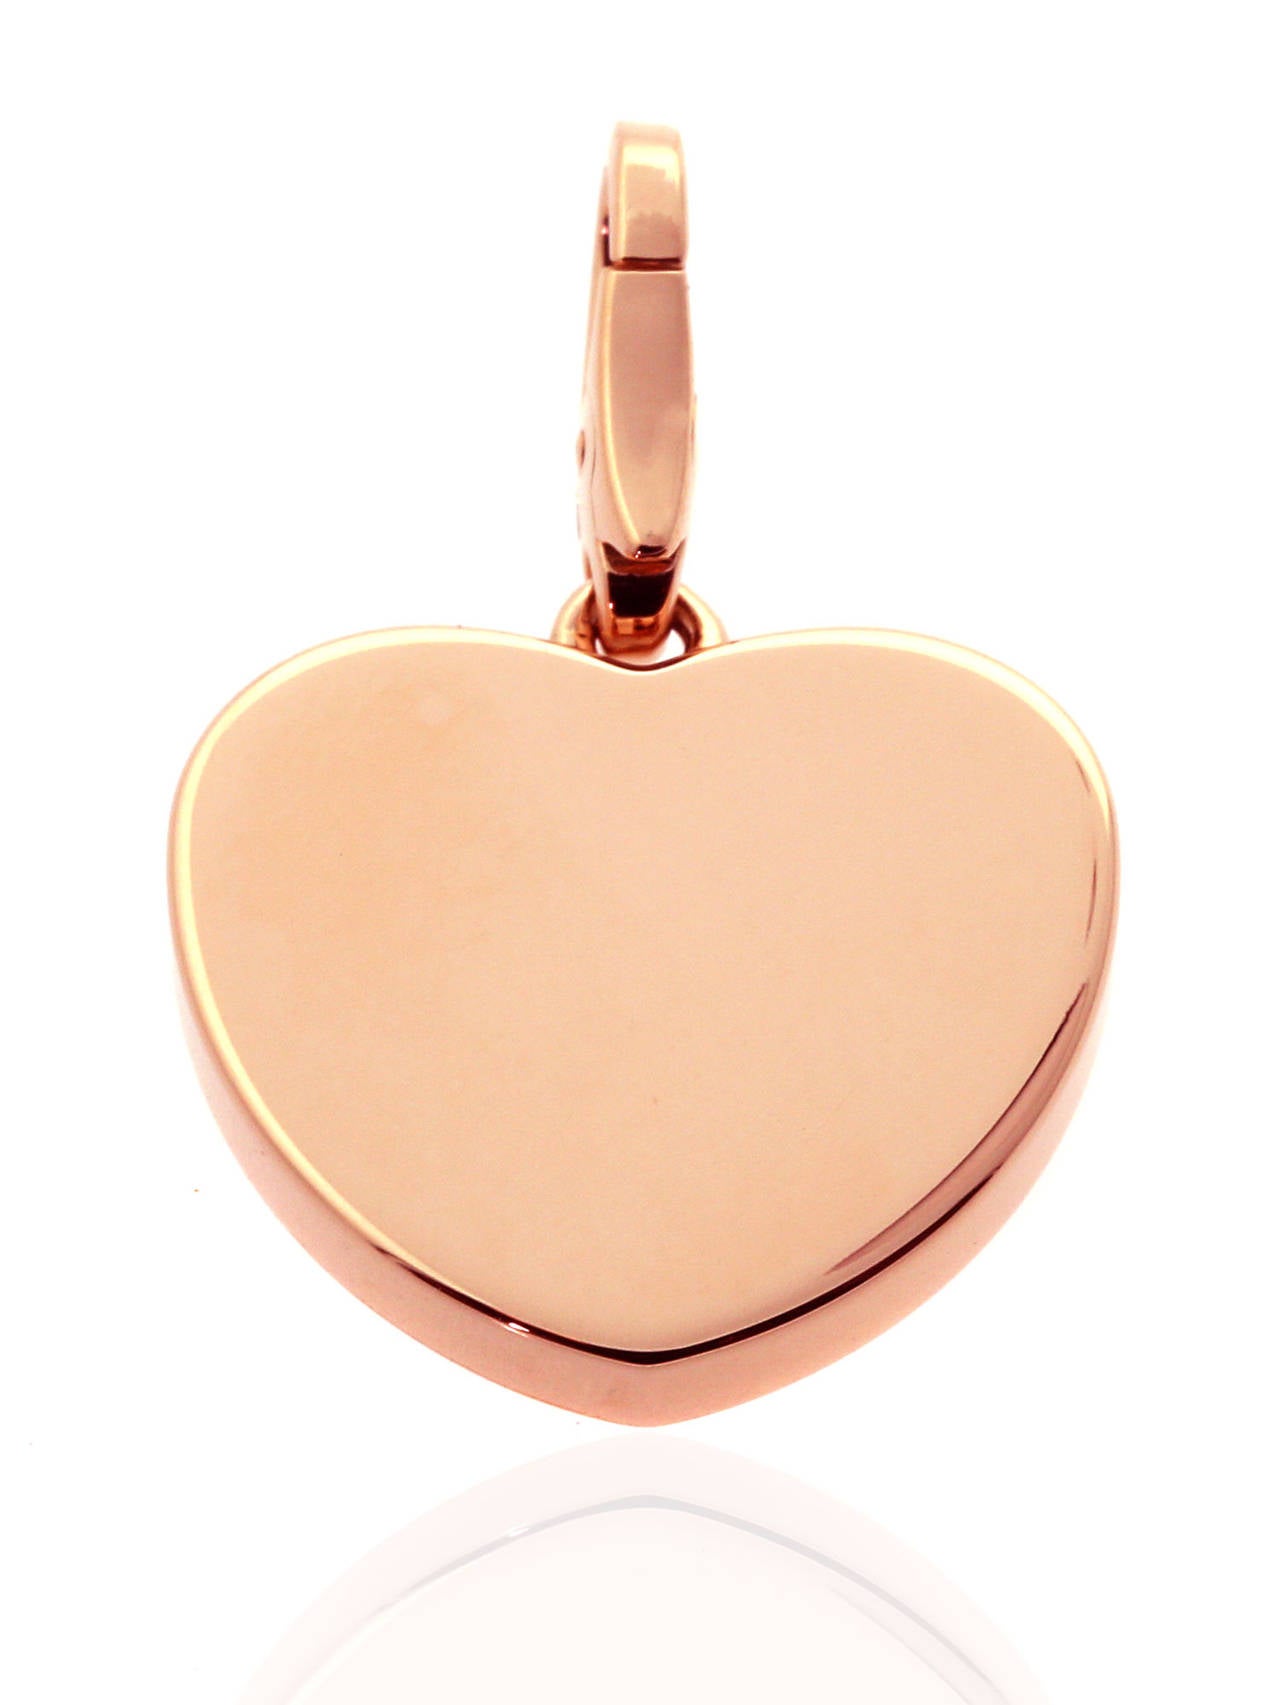 This stunning example of meticulous craftsmanship from Cartier features a Heart crafted out of 18k Rose gold highlighting a Labyrinth! Find your way to her heart with this eye catching design.

Made of 18K Rose Gold
Hallmarks: Cartier, 750,